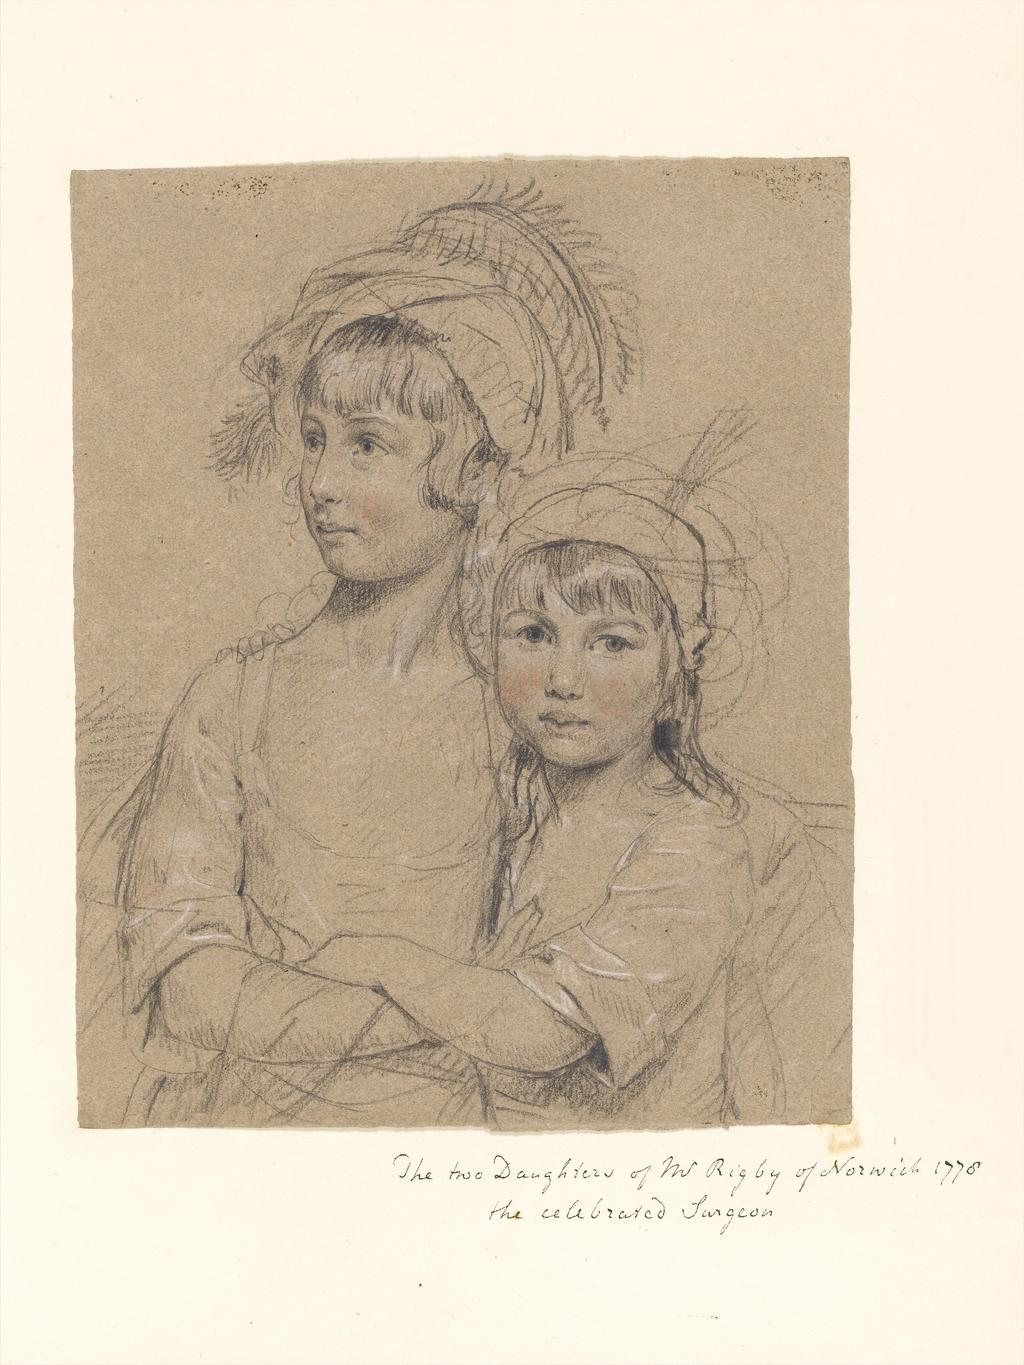 An image of The Misses Rigby. Downman, John (British, 1750-1824). Black, red and white chalk, some lines incised with a stylus, on brown laid paper, attached to mount sheet, height 239 mm, width 184 mm, 1778. Acquistion: National Art Collections Fund.